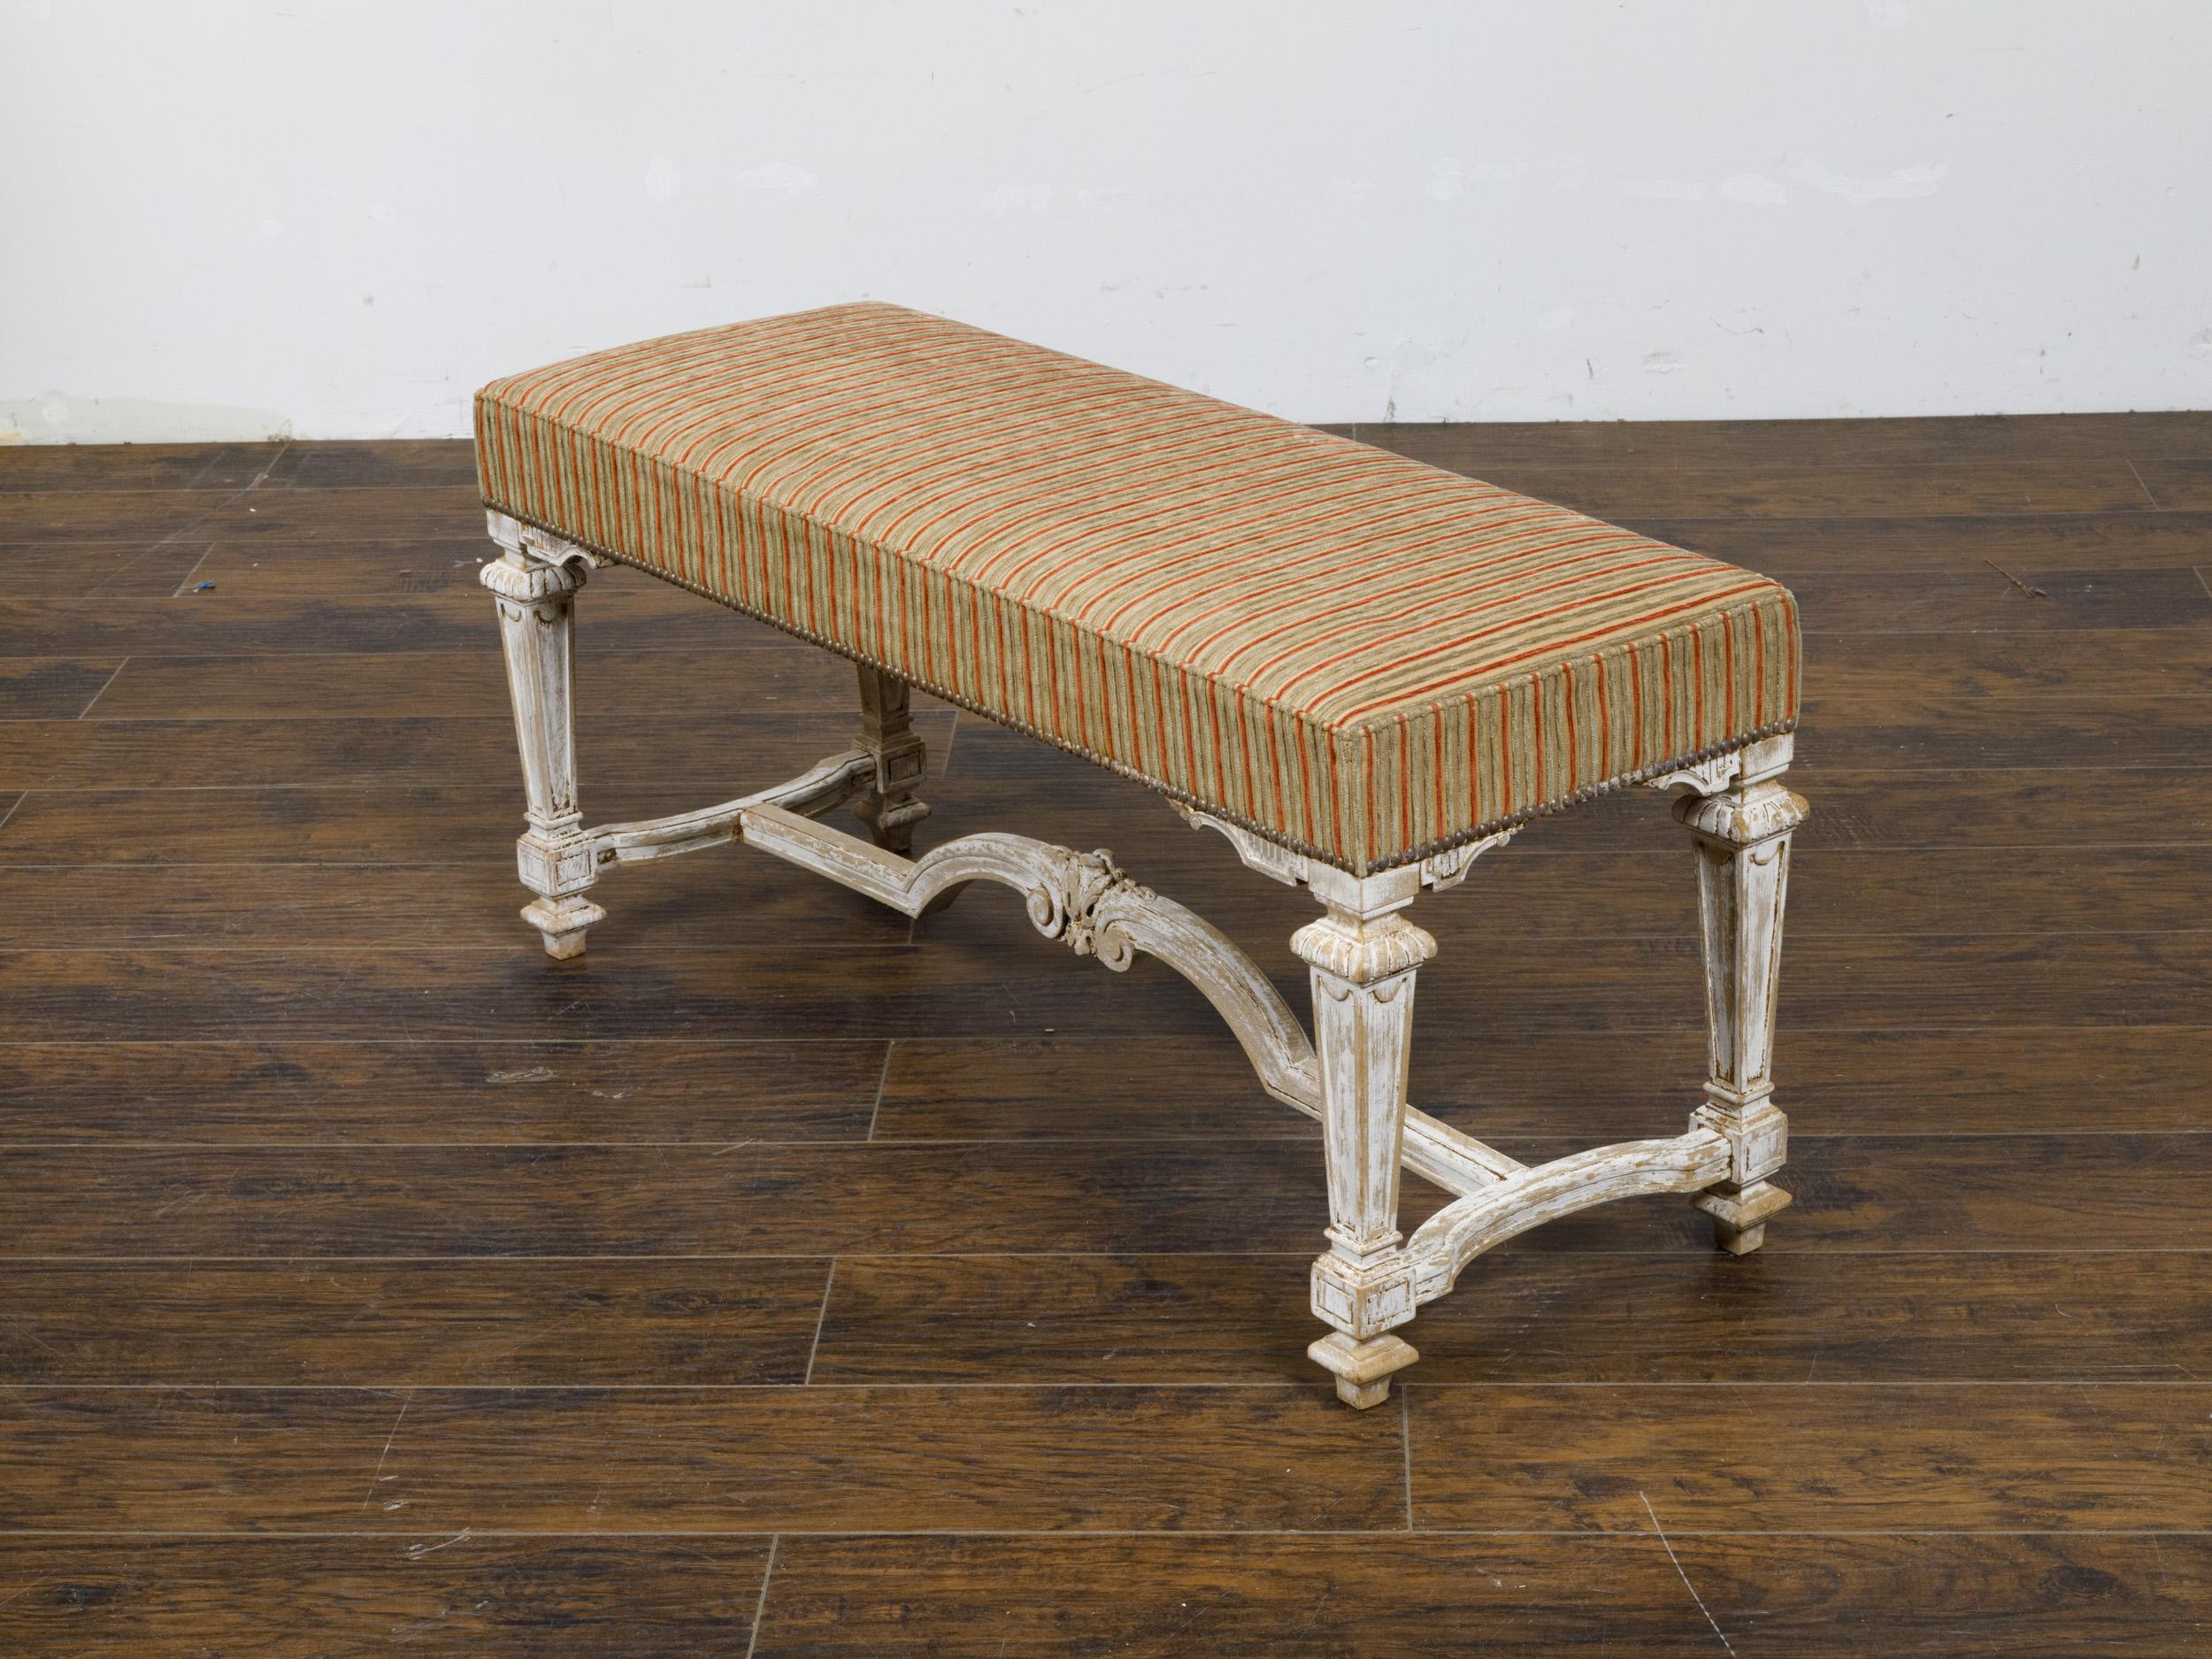 A French Louis XVI style painted wood bench from circa 1950 with off-white distressed painted finish, tapered legs and carved cross-stretcher. This exquisite French Louis XVI style painted wood bench, circa 1950, offers an air of refined elegance